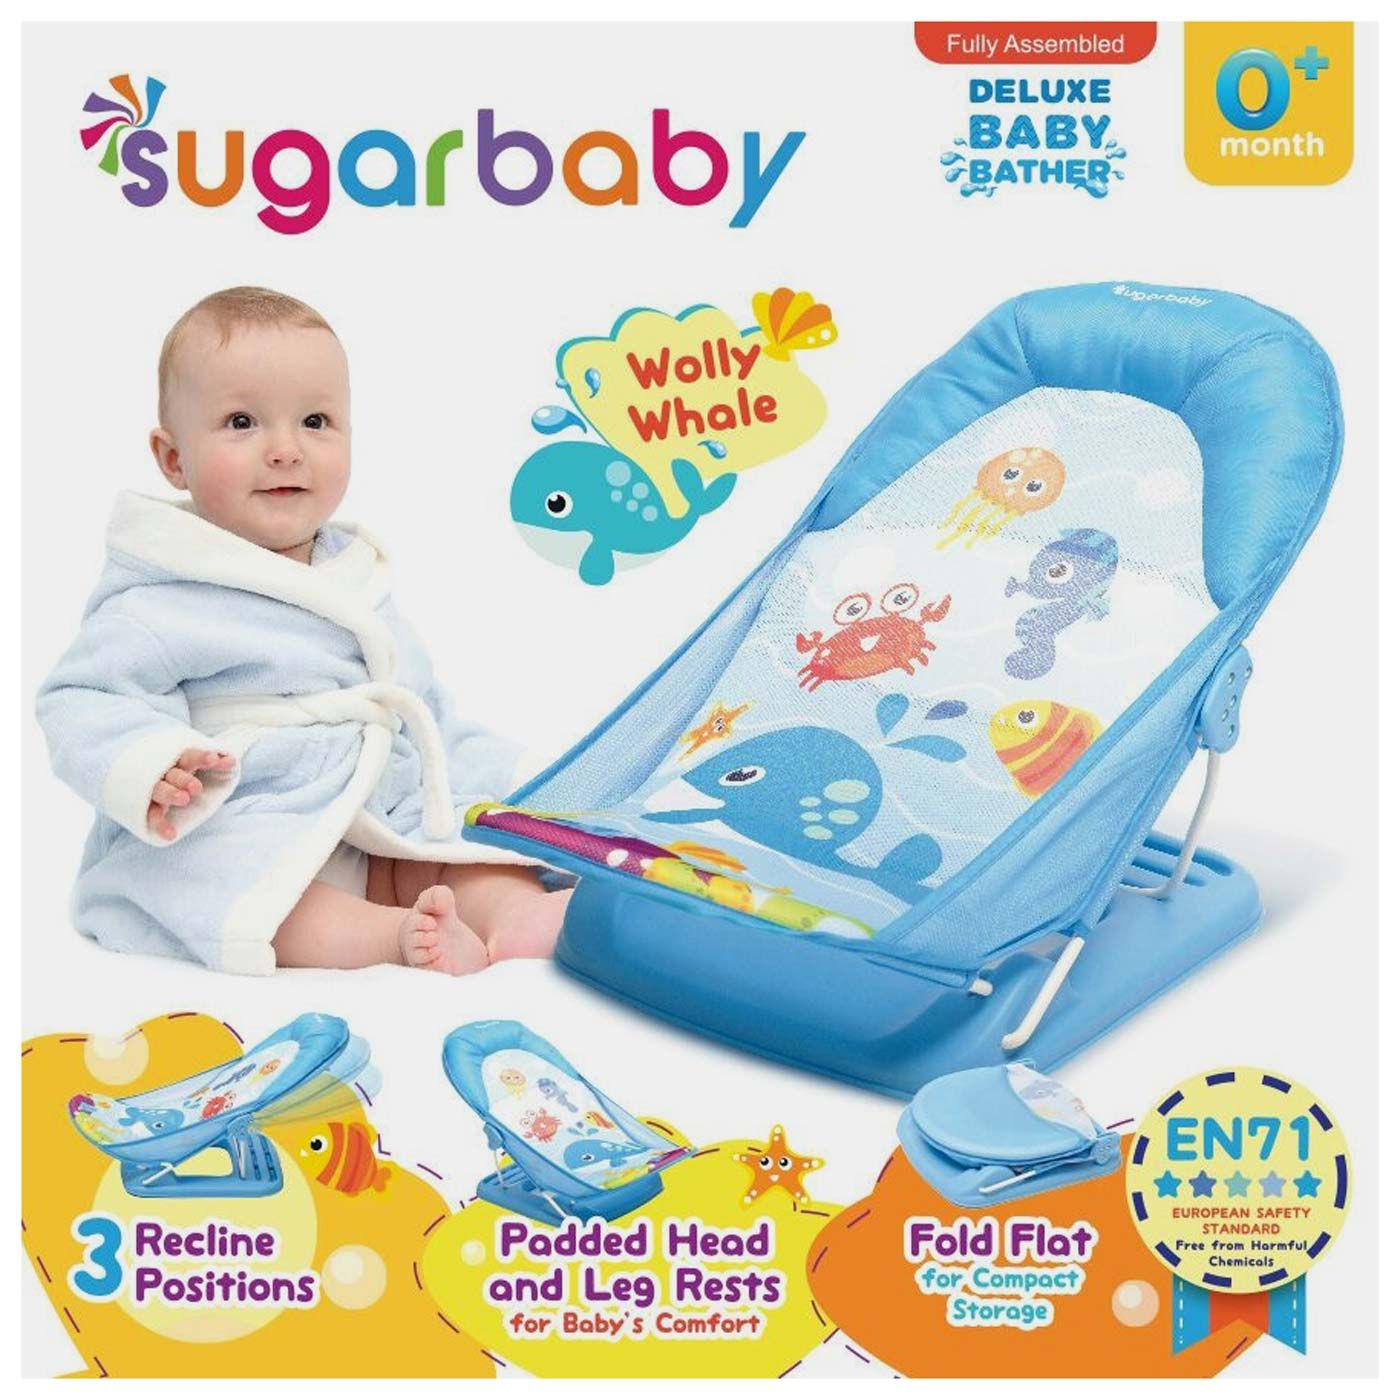 Sugar Baby Deluxe Baby Bather - Wolly Whale - 1